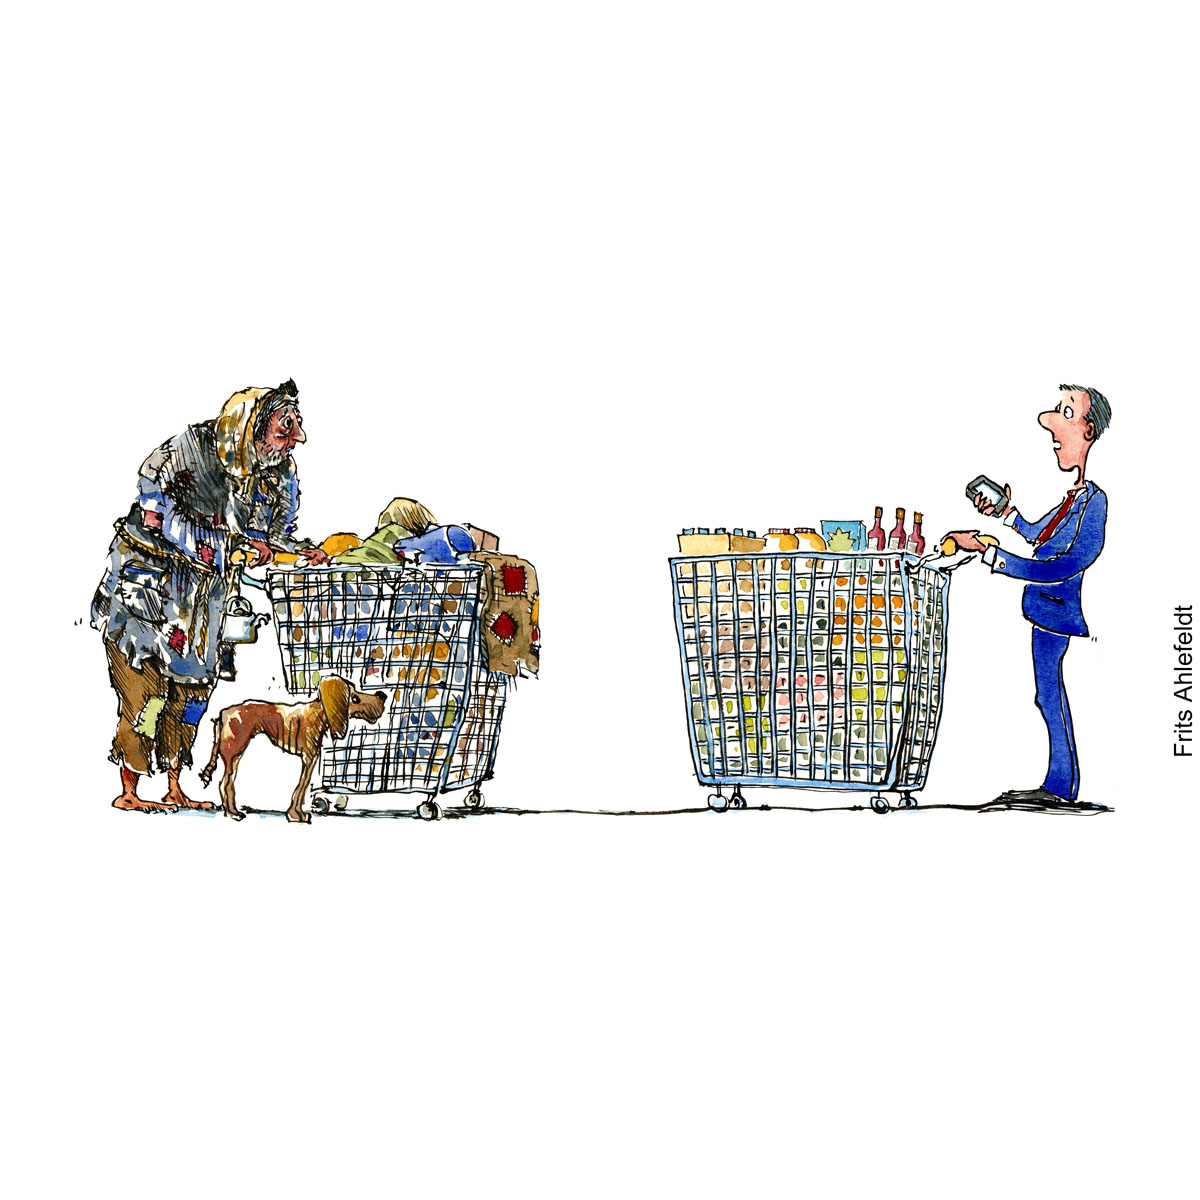 Drawing of a homeless man with all his belongings in a shopping wagon, facing a man with a shopping wagon filled with food. Illustration by Frits Ahlefeldt